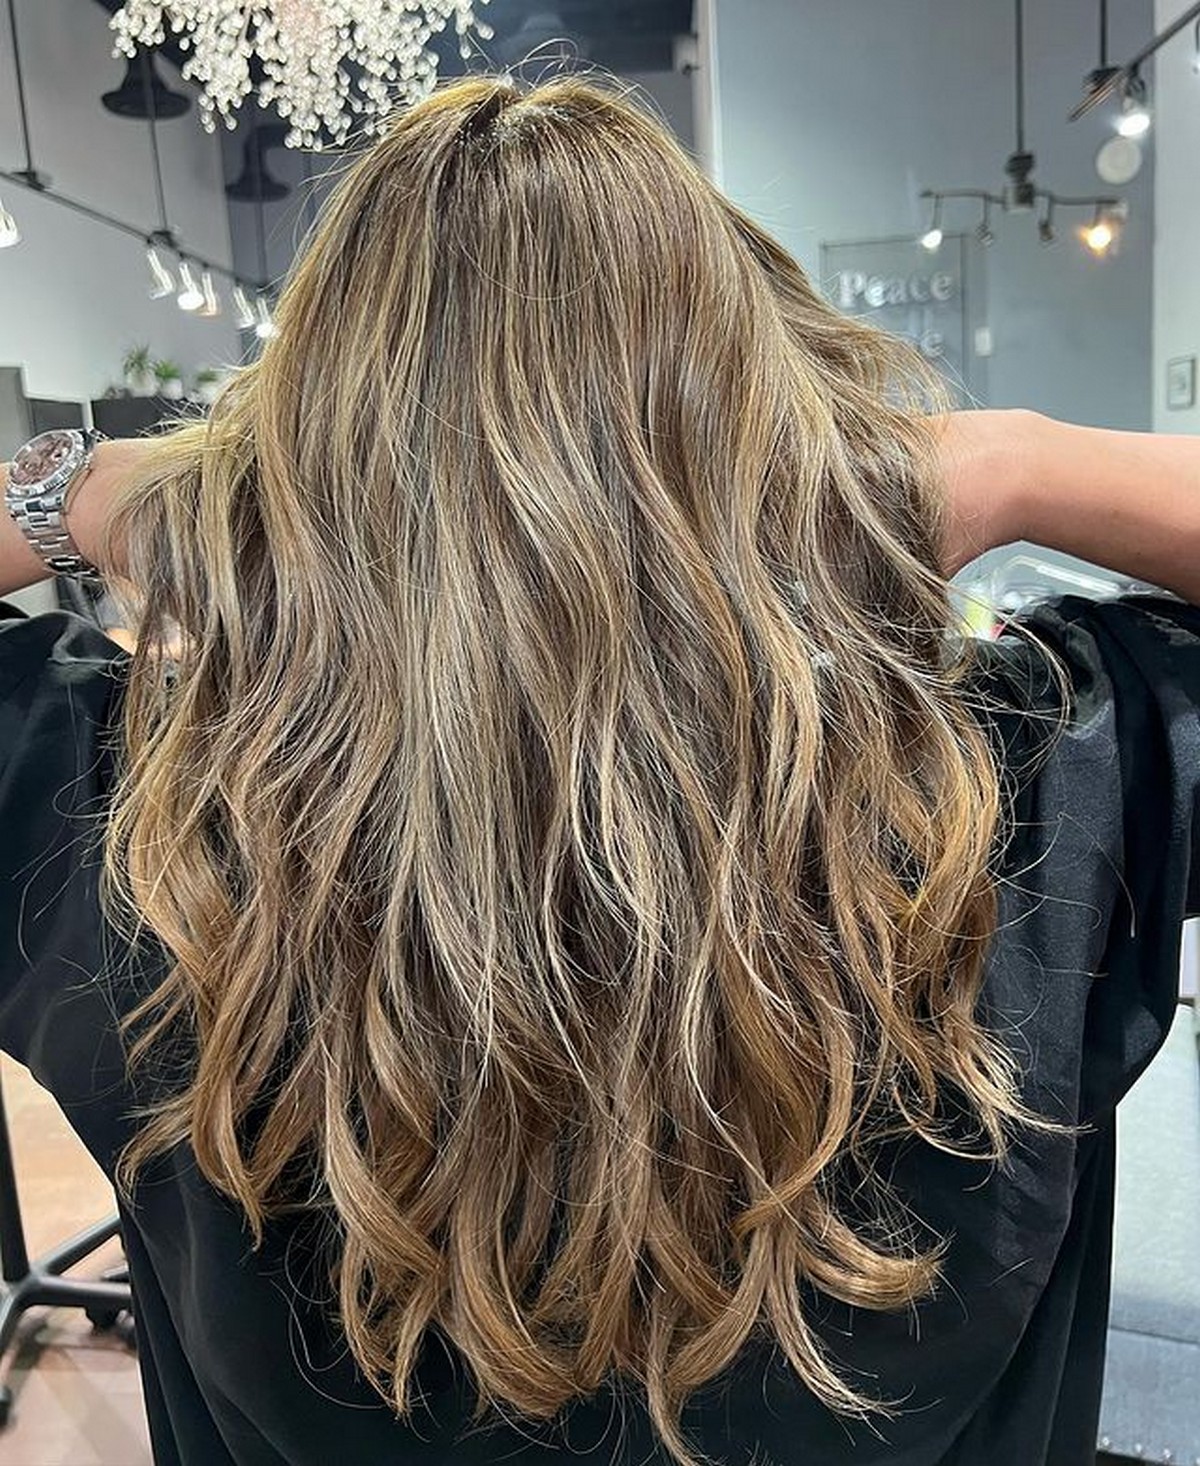 Long Messy Dirty Blonde Ombre Hair